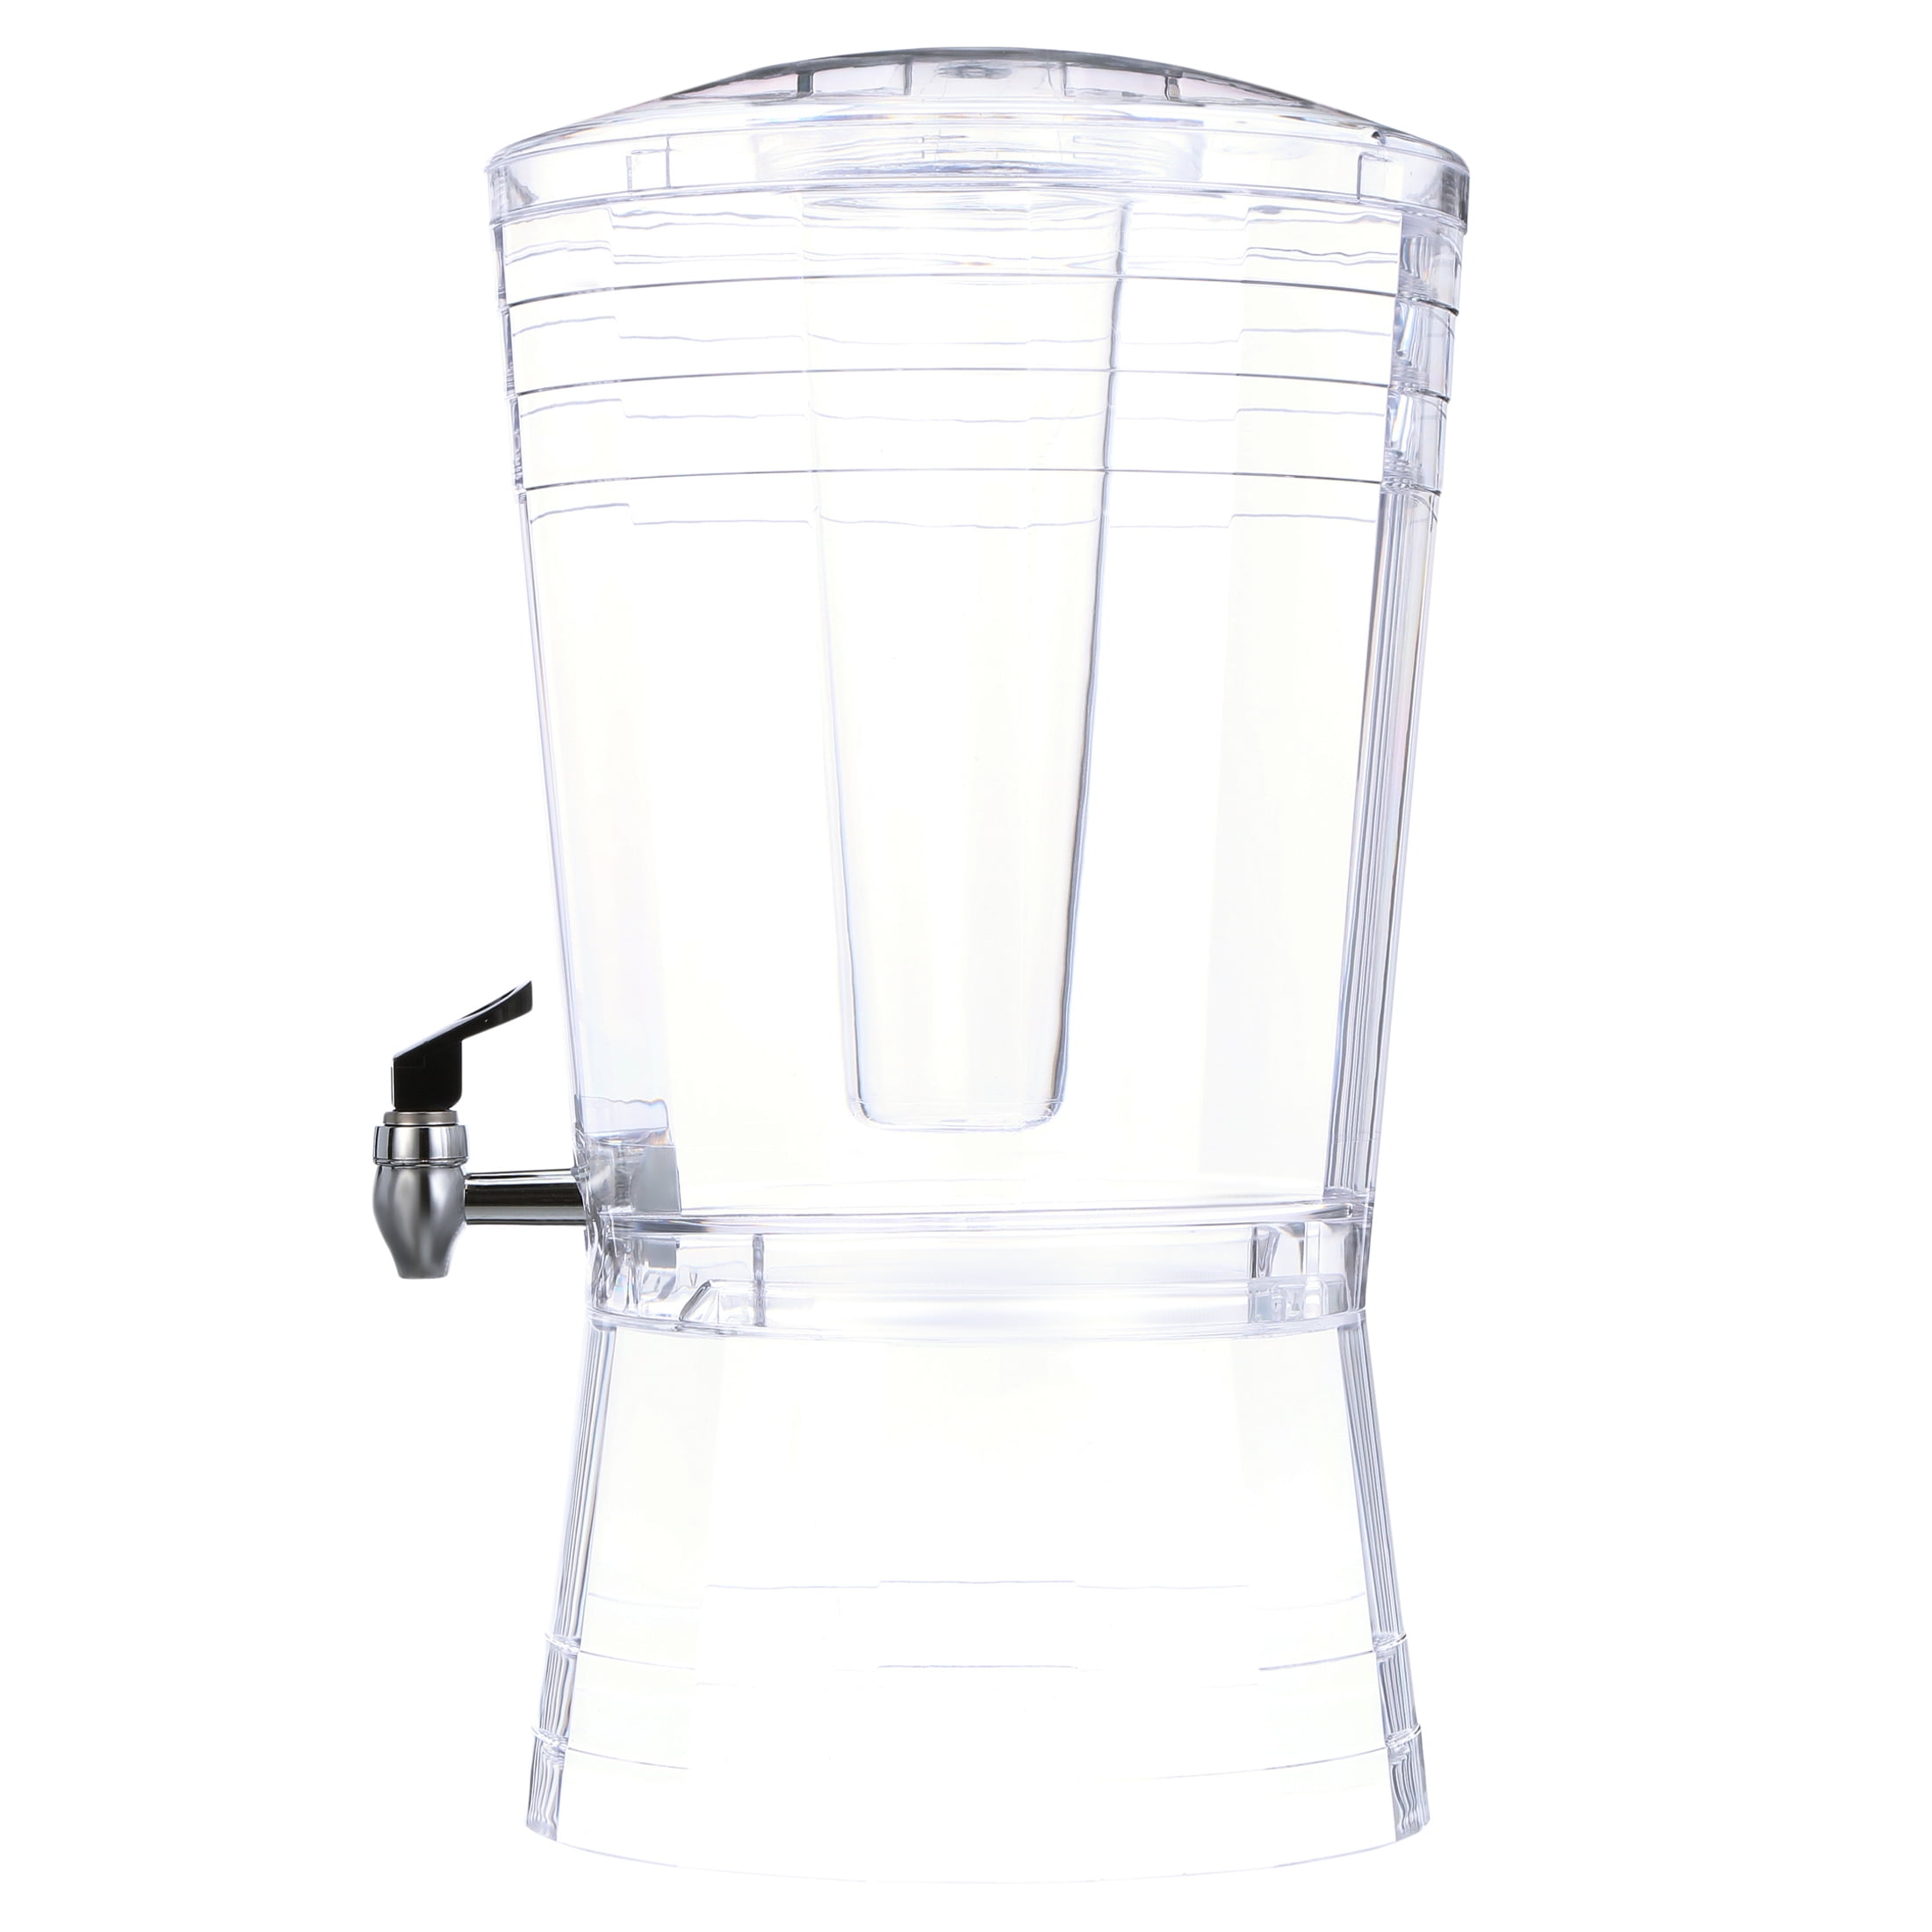 Restaurantware BEV Tek 3 Gallon Beverage Dispenser, 1 Square Drink Dispenser for Parties - with Infusion Core, Bamboo Base, Clear Acrylic Drink